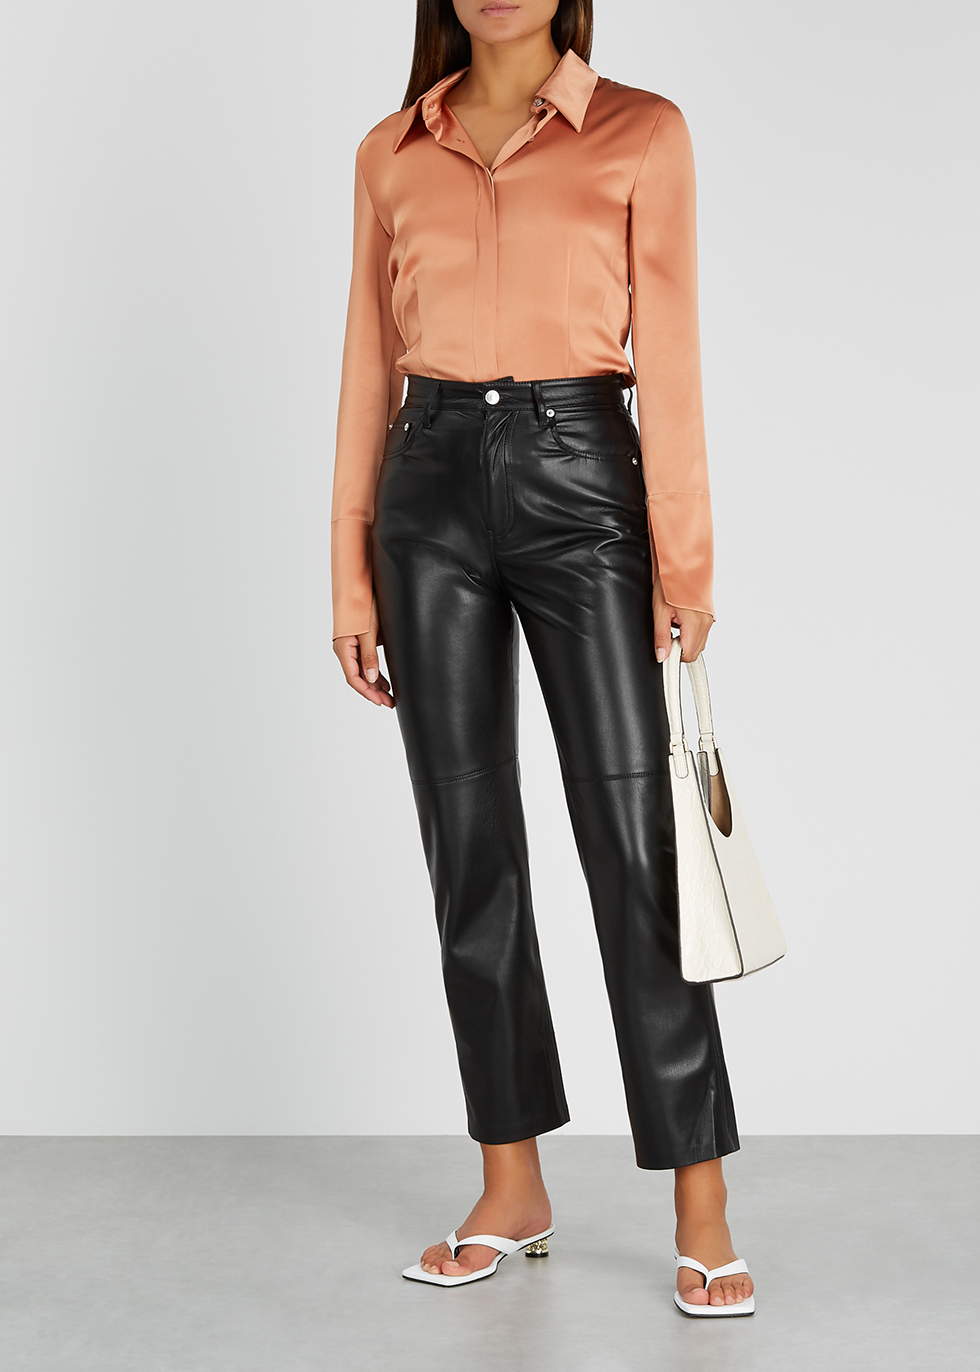 Brown Leather Trousers  Designer Desirables